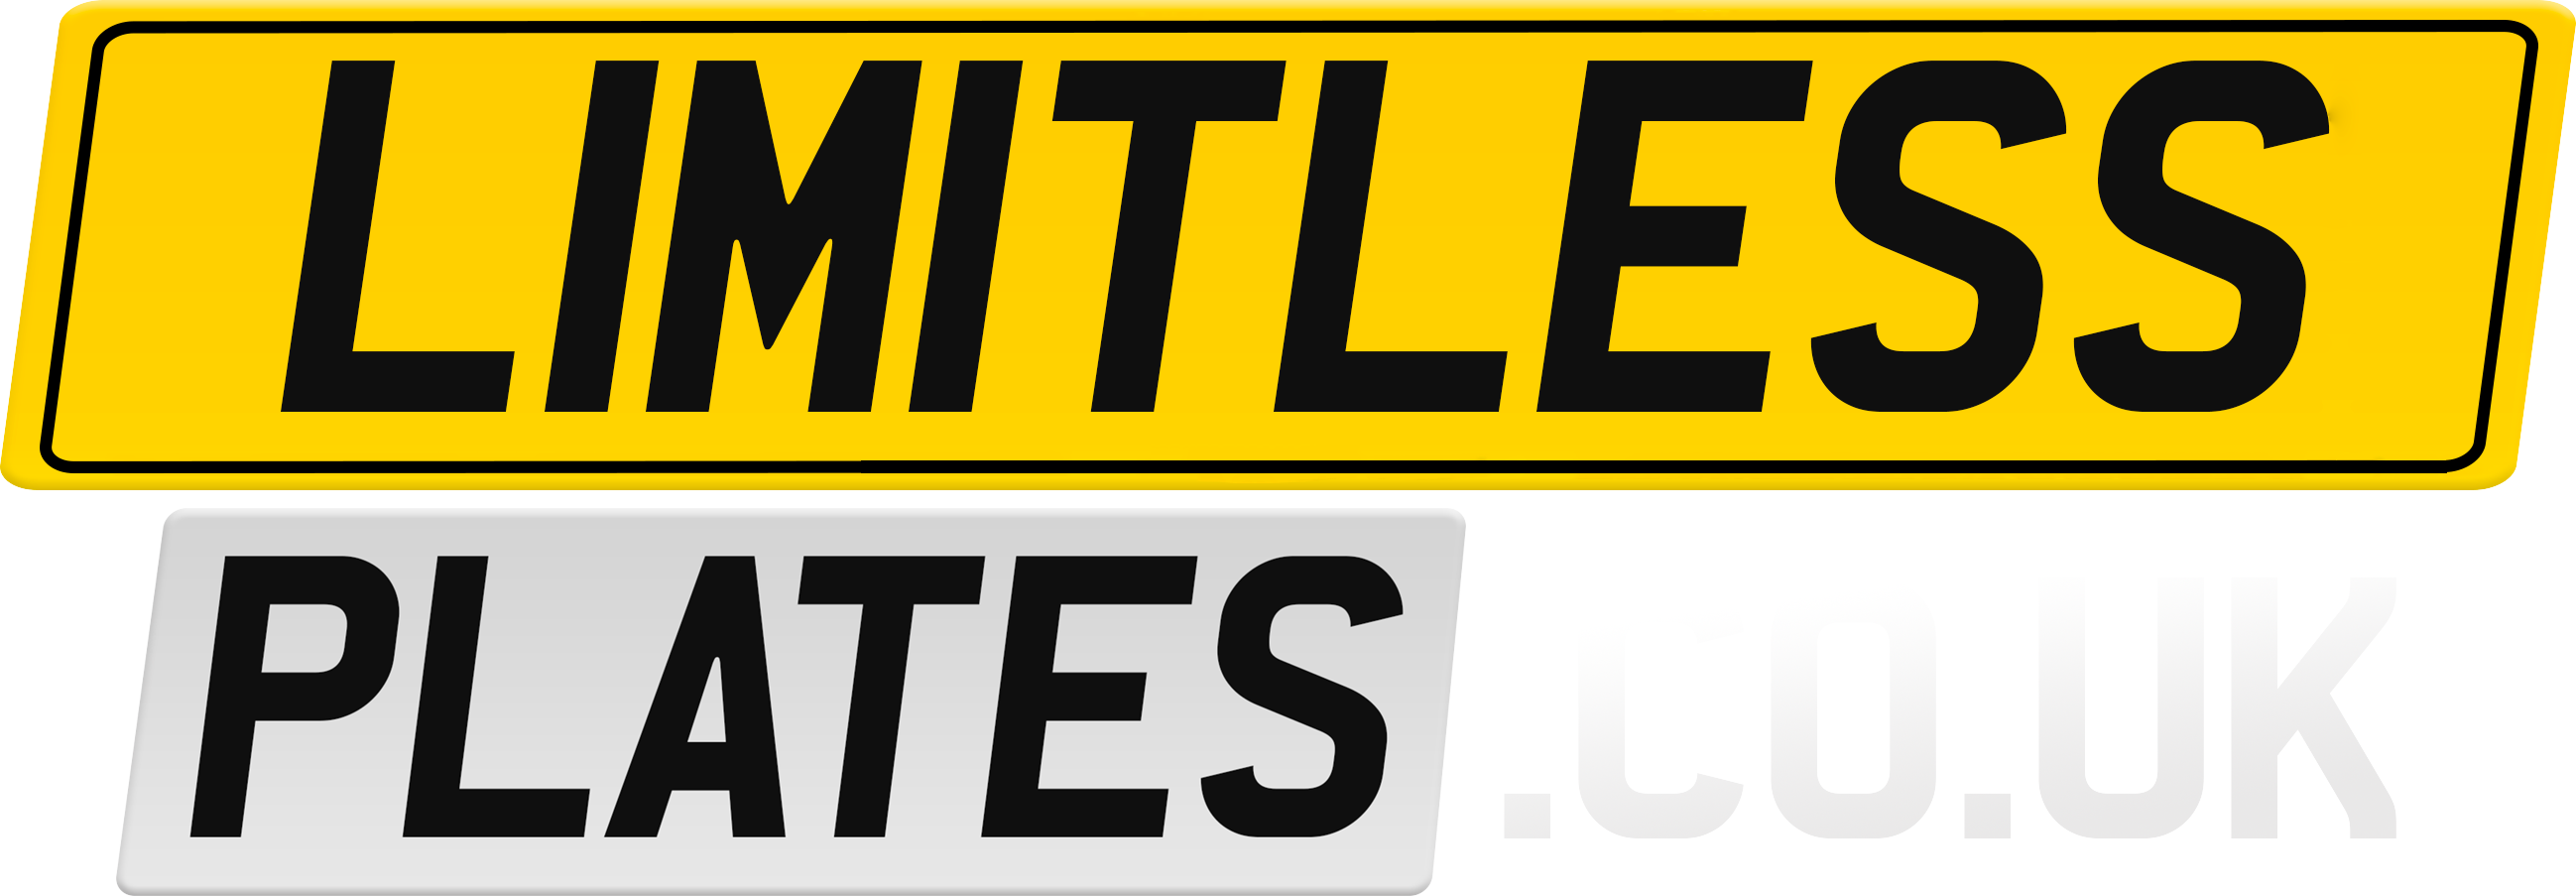 Limitless Plates: 3D + 4D Number Plate Specialists